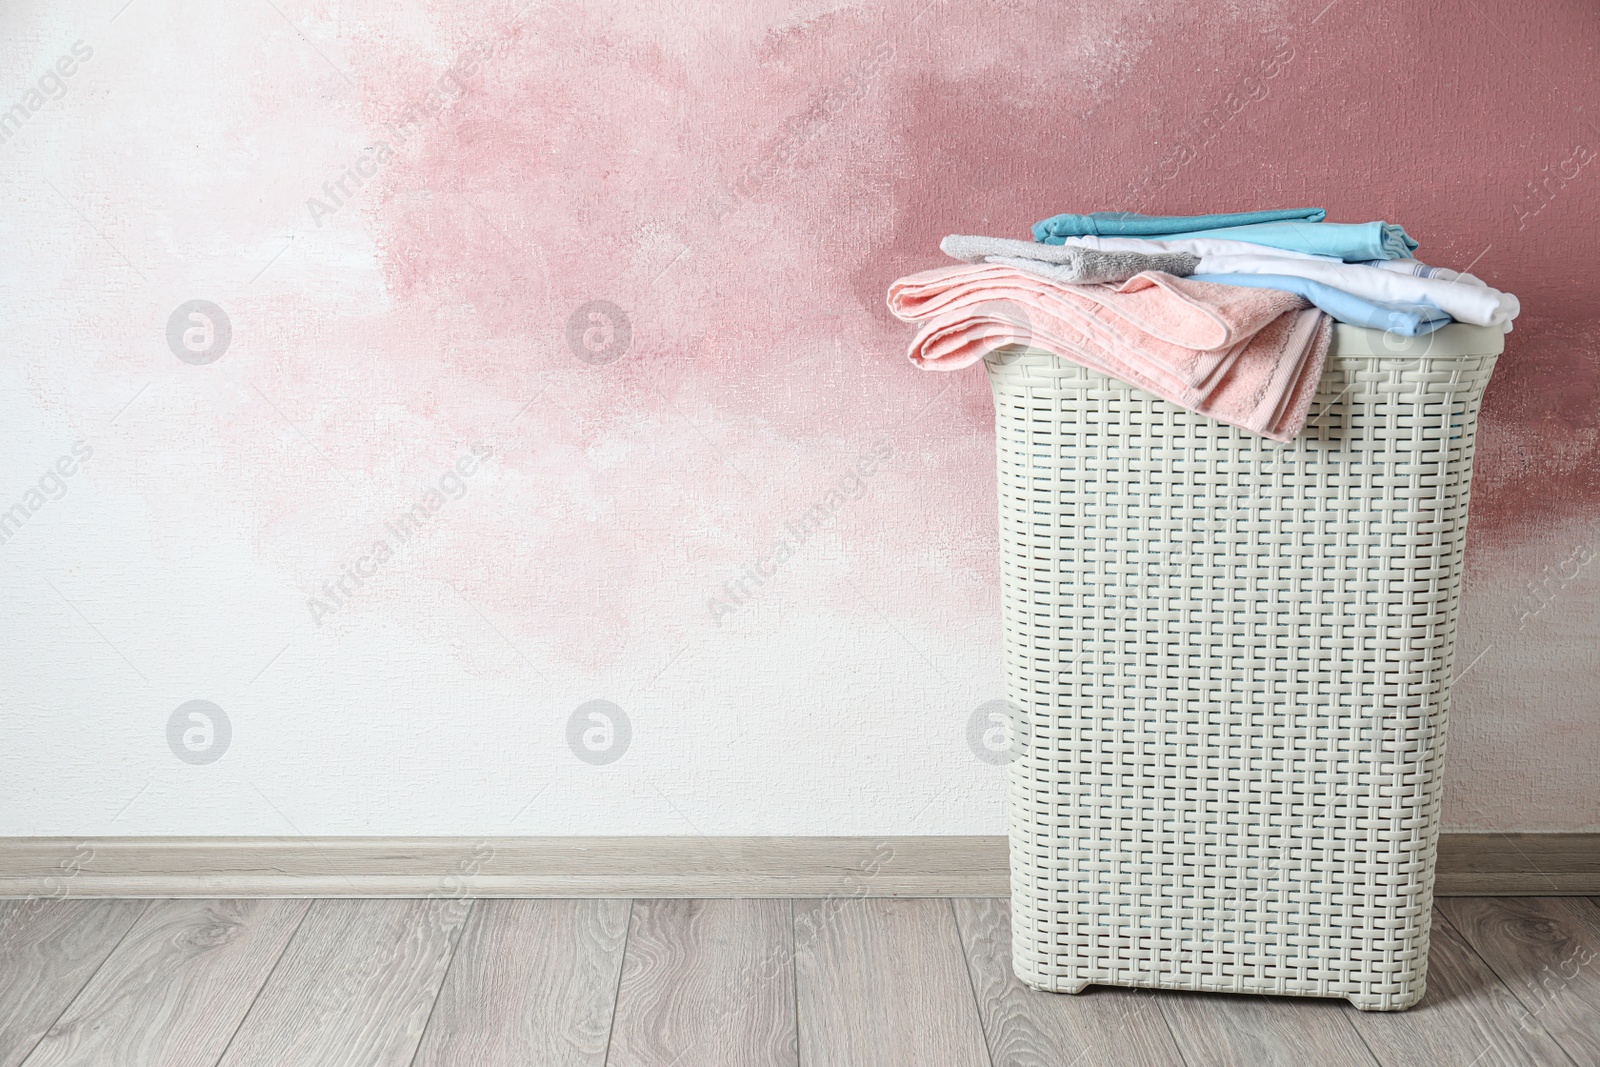 Photo of Basket with clean laundry on wooden floor near pink wall, space for text